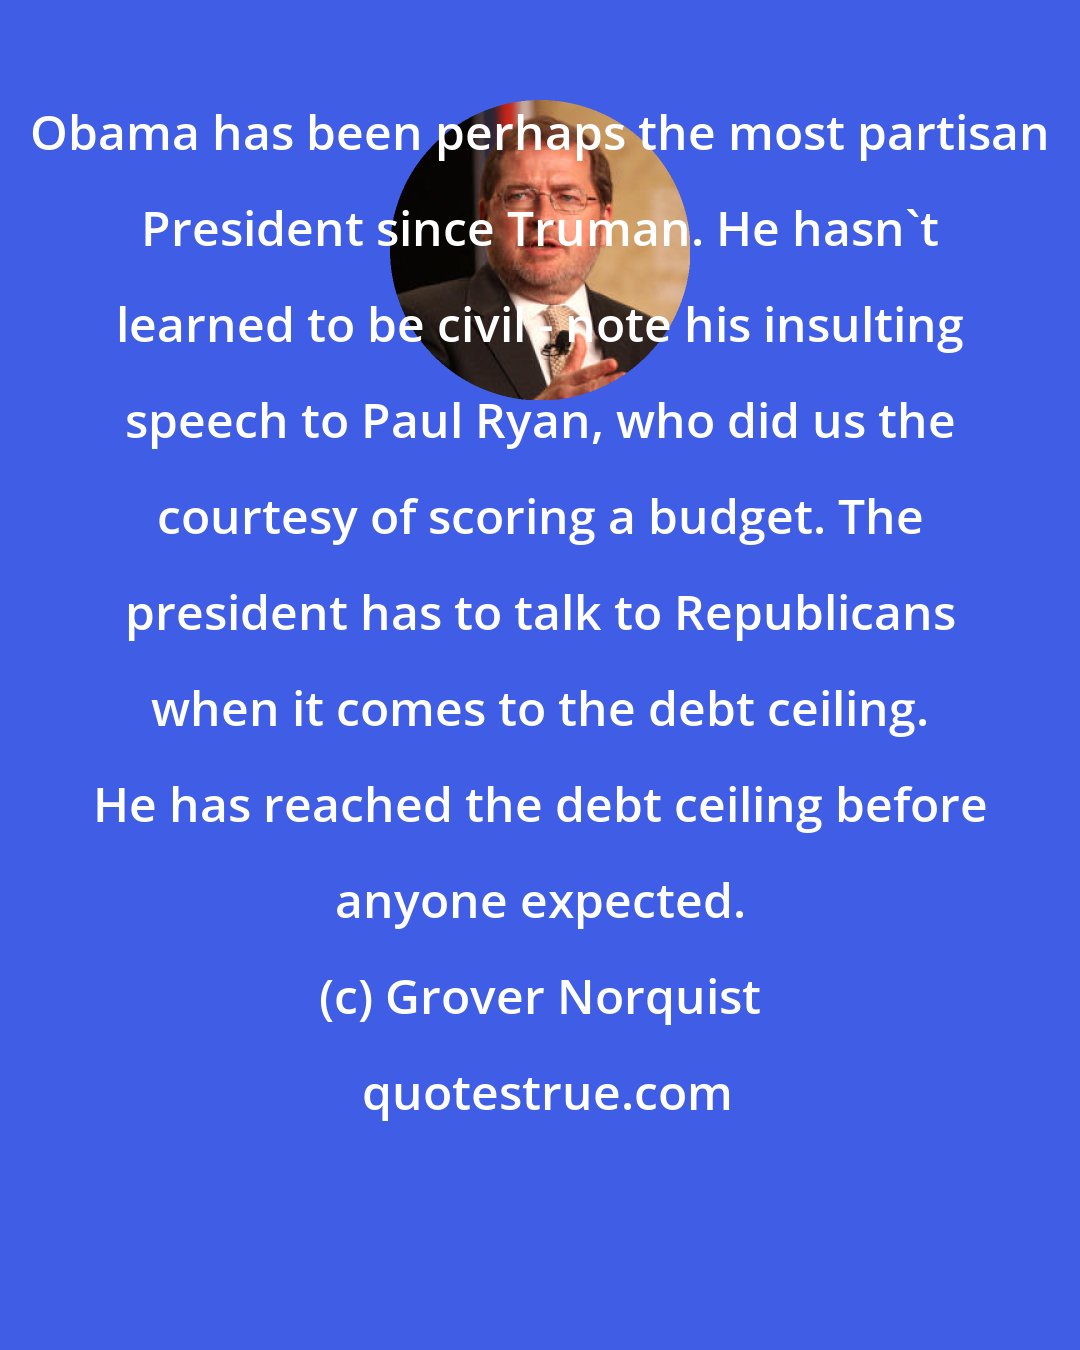 Grover Norquist: Obama has been perhaps the most partisan President since Truman. He hasn't learned to be civil - note his insulting speech to Paul Ryan, who did us the courtesy of scoring a budget. The president has to talk to Republicans when it comes to the debt ceiling. He has reached the debt ceiling before anyone expected.